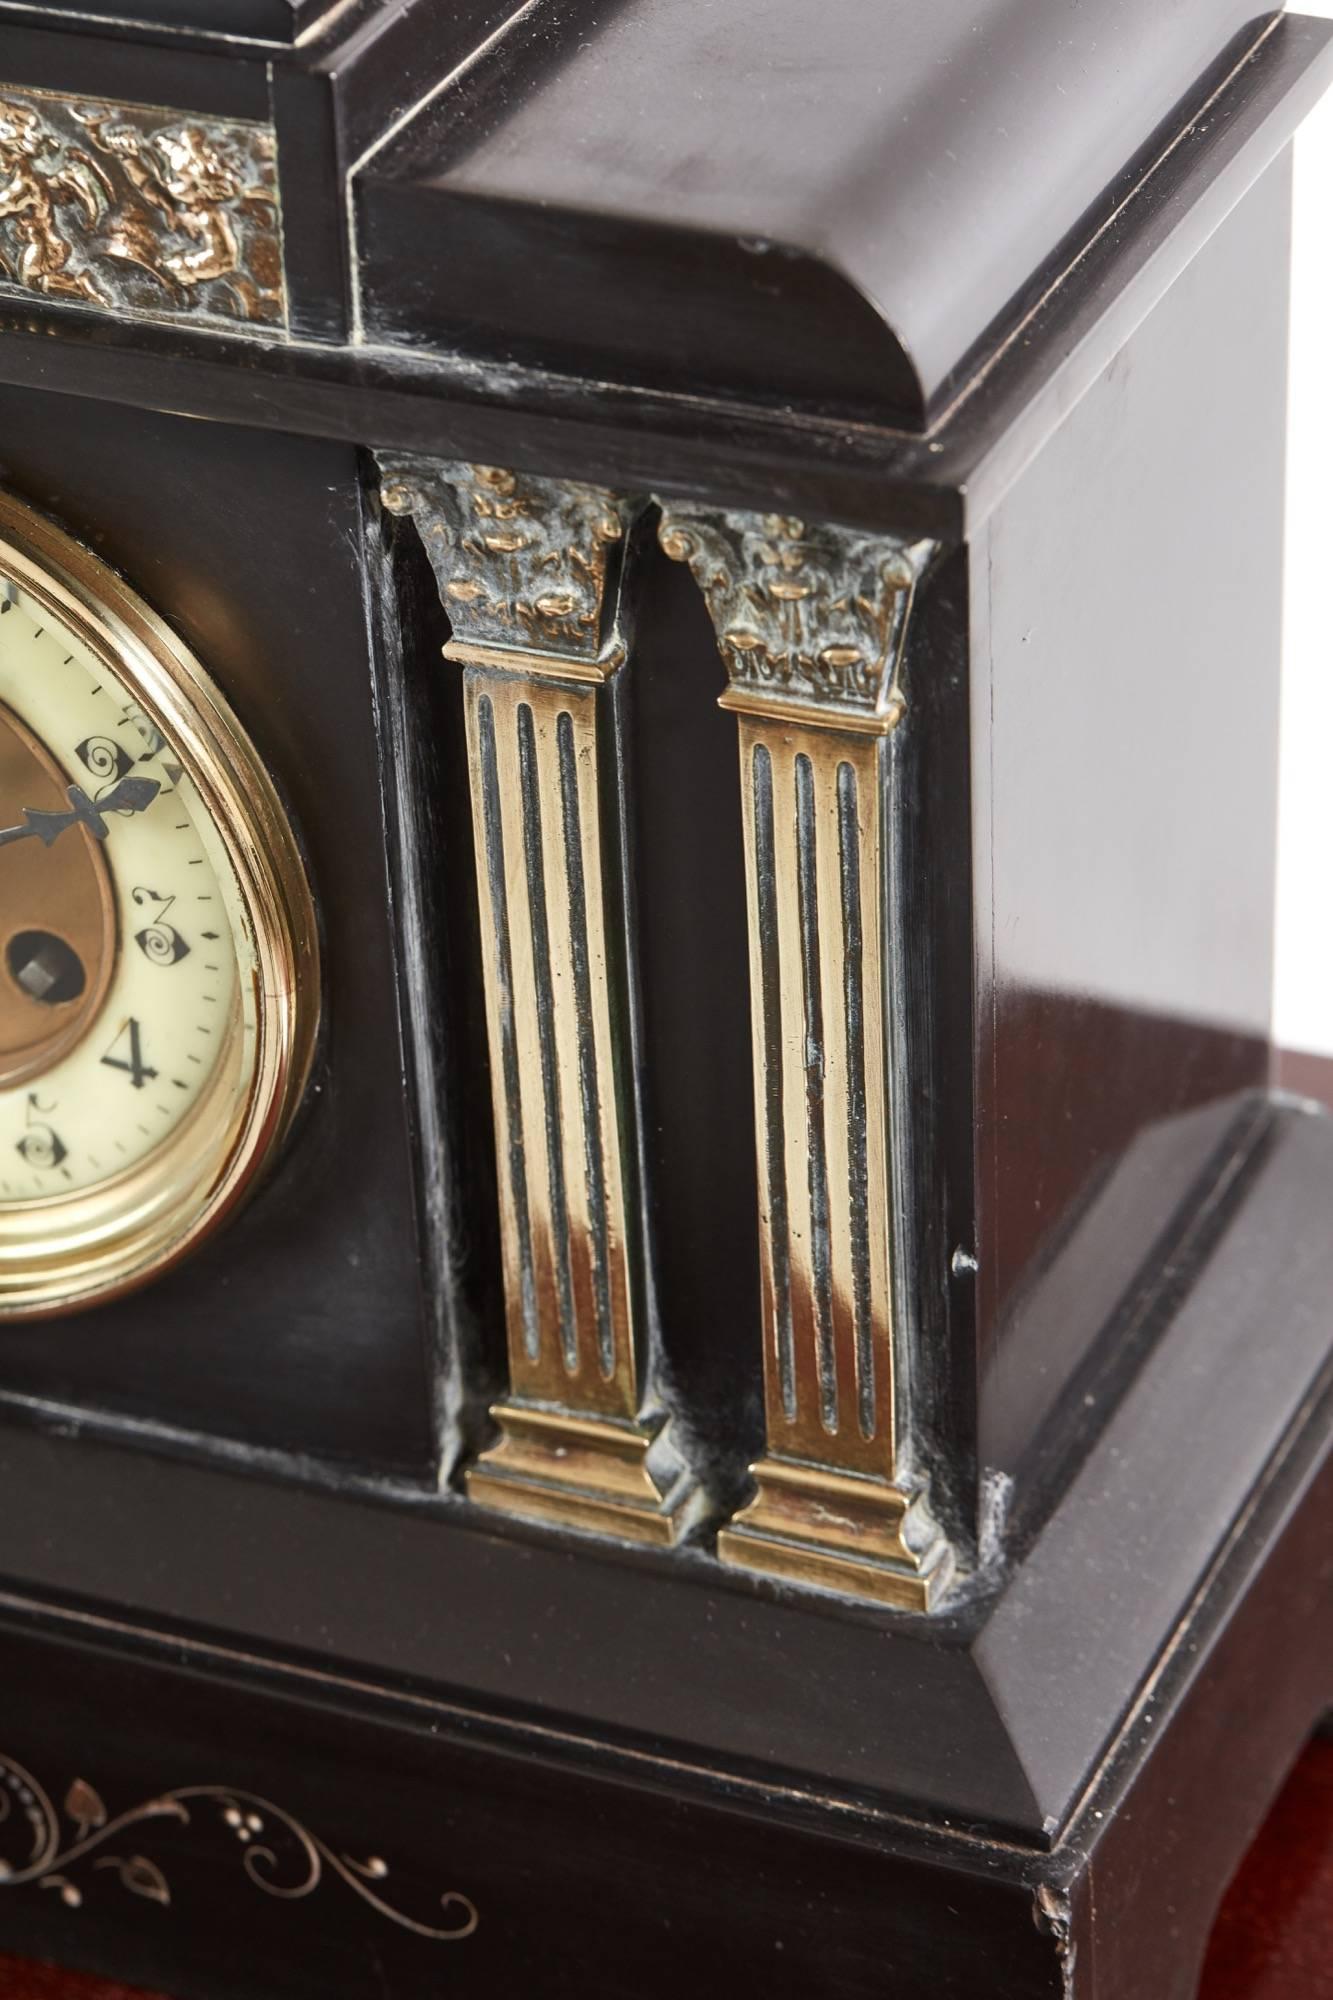 Victorian black marble mantel clock, with ornate solid brass embellishment, eight day movement in good working order, original key.